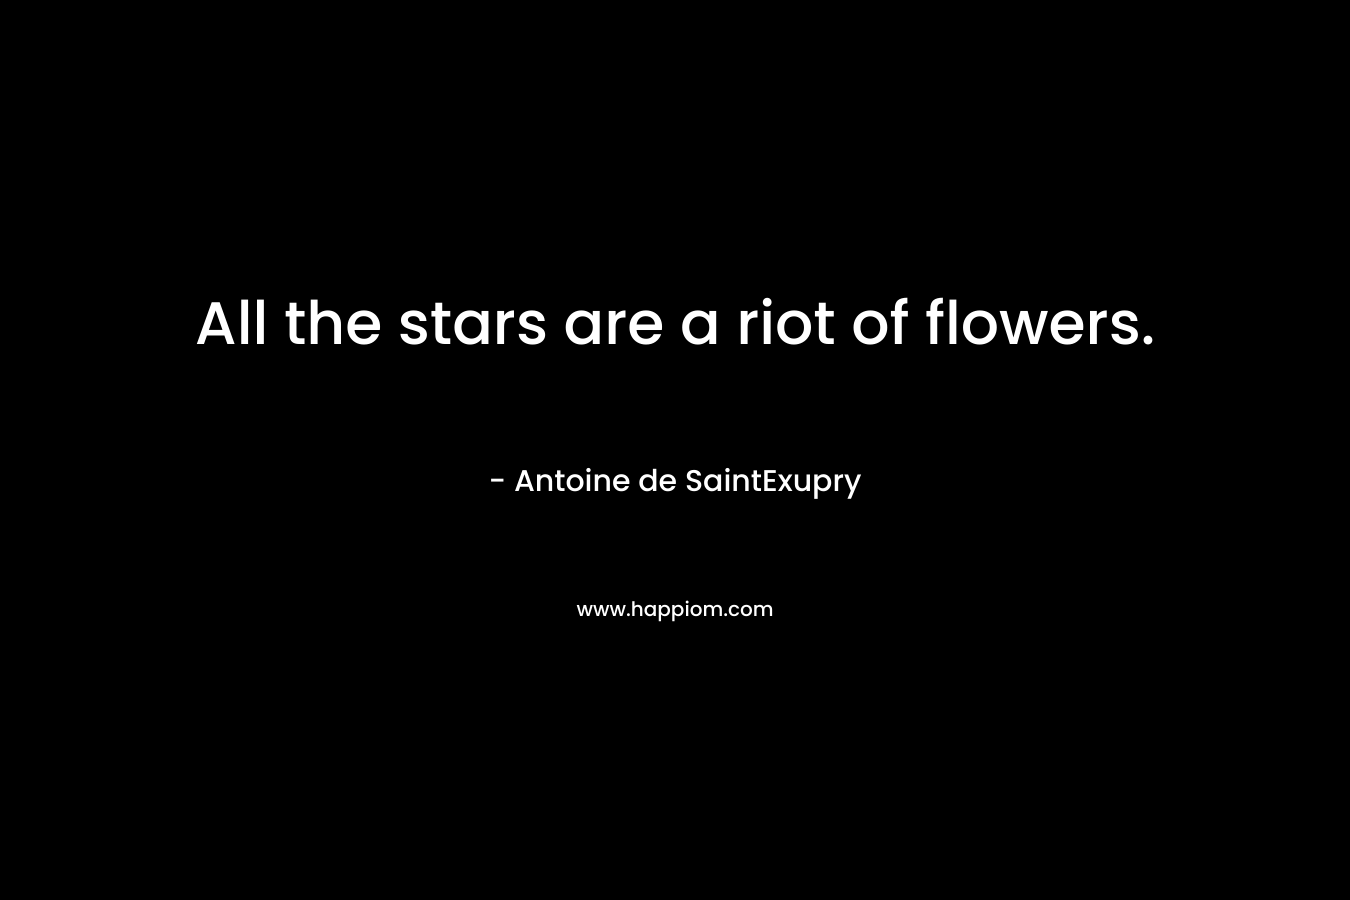 All the stars are a riot of flowers.